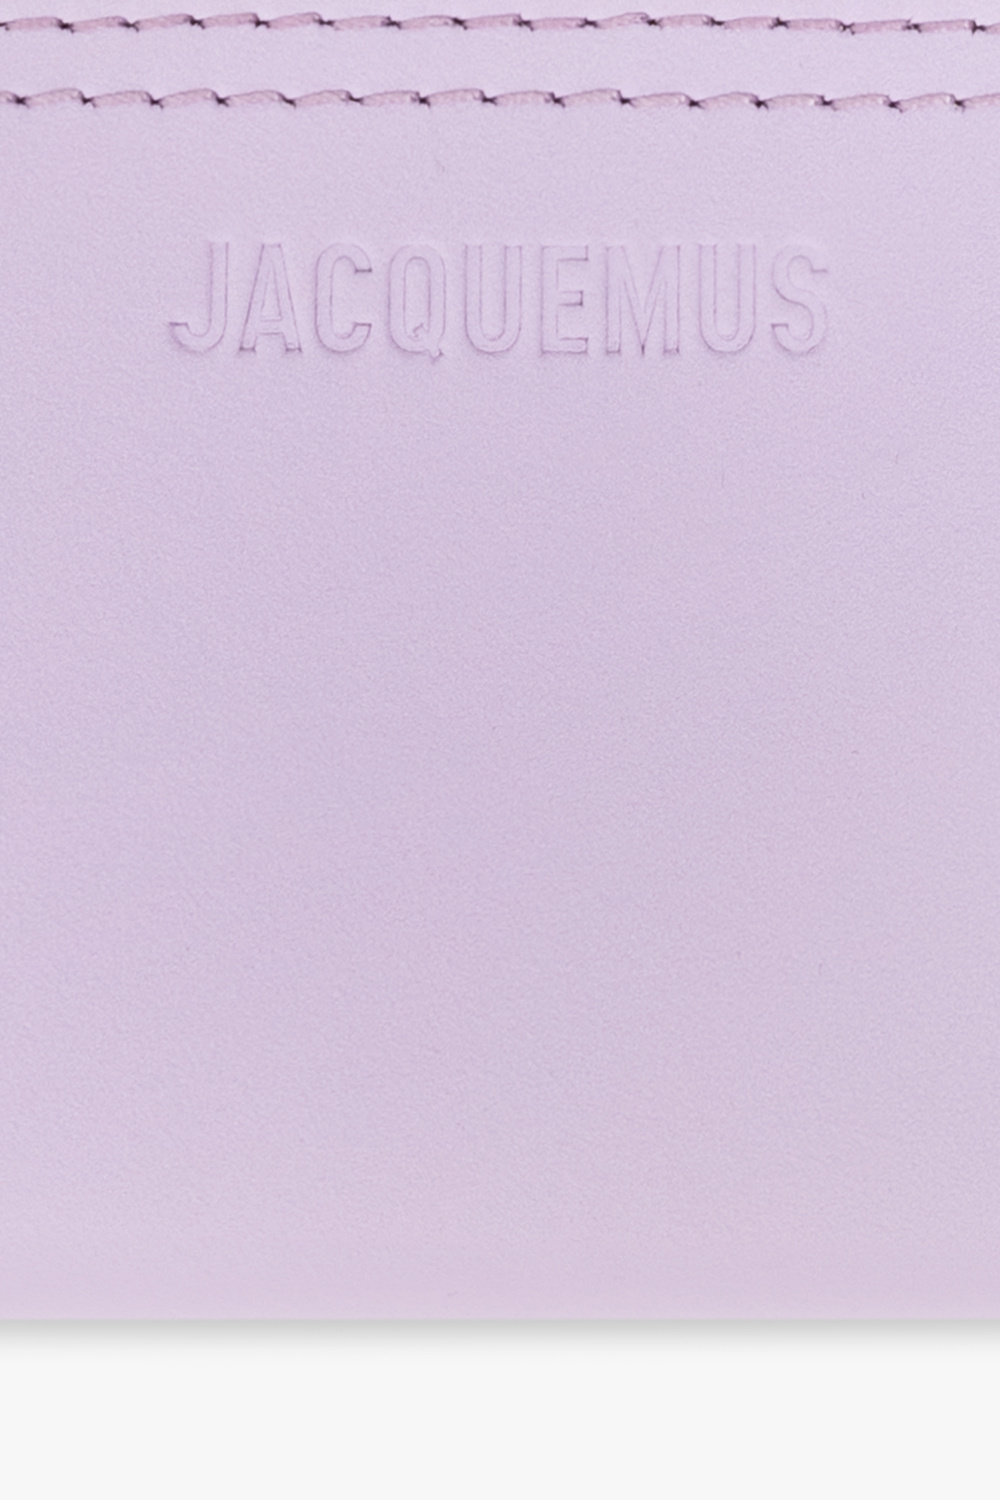 Jacquemus GOLDEN GOOSE: THE PERFECT IMPERFECTION